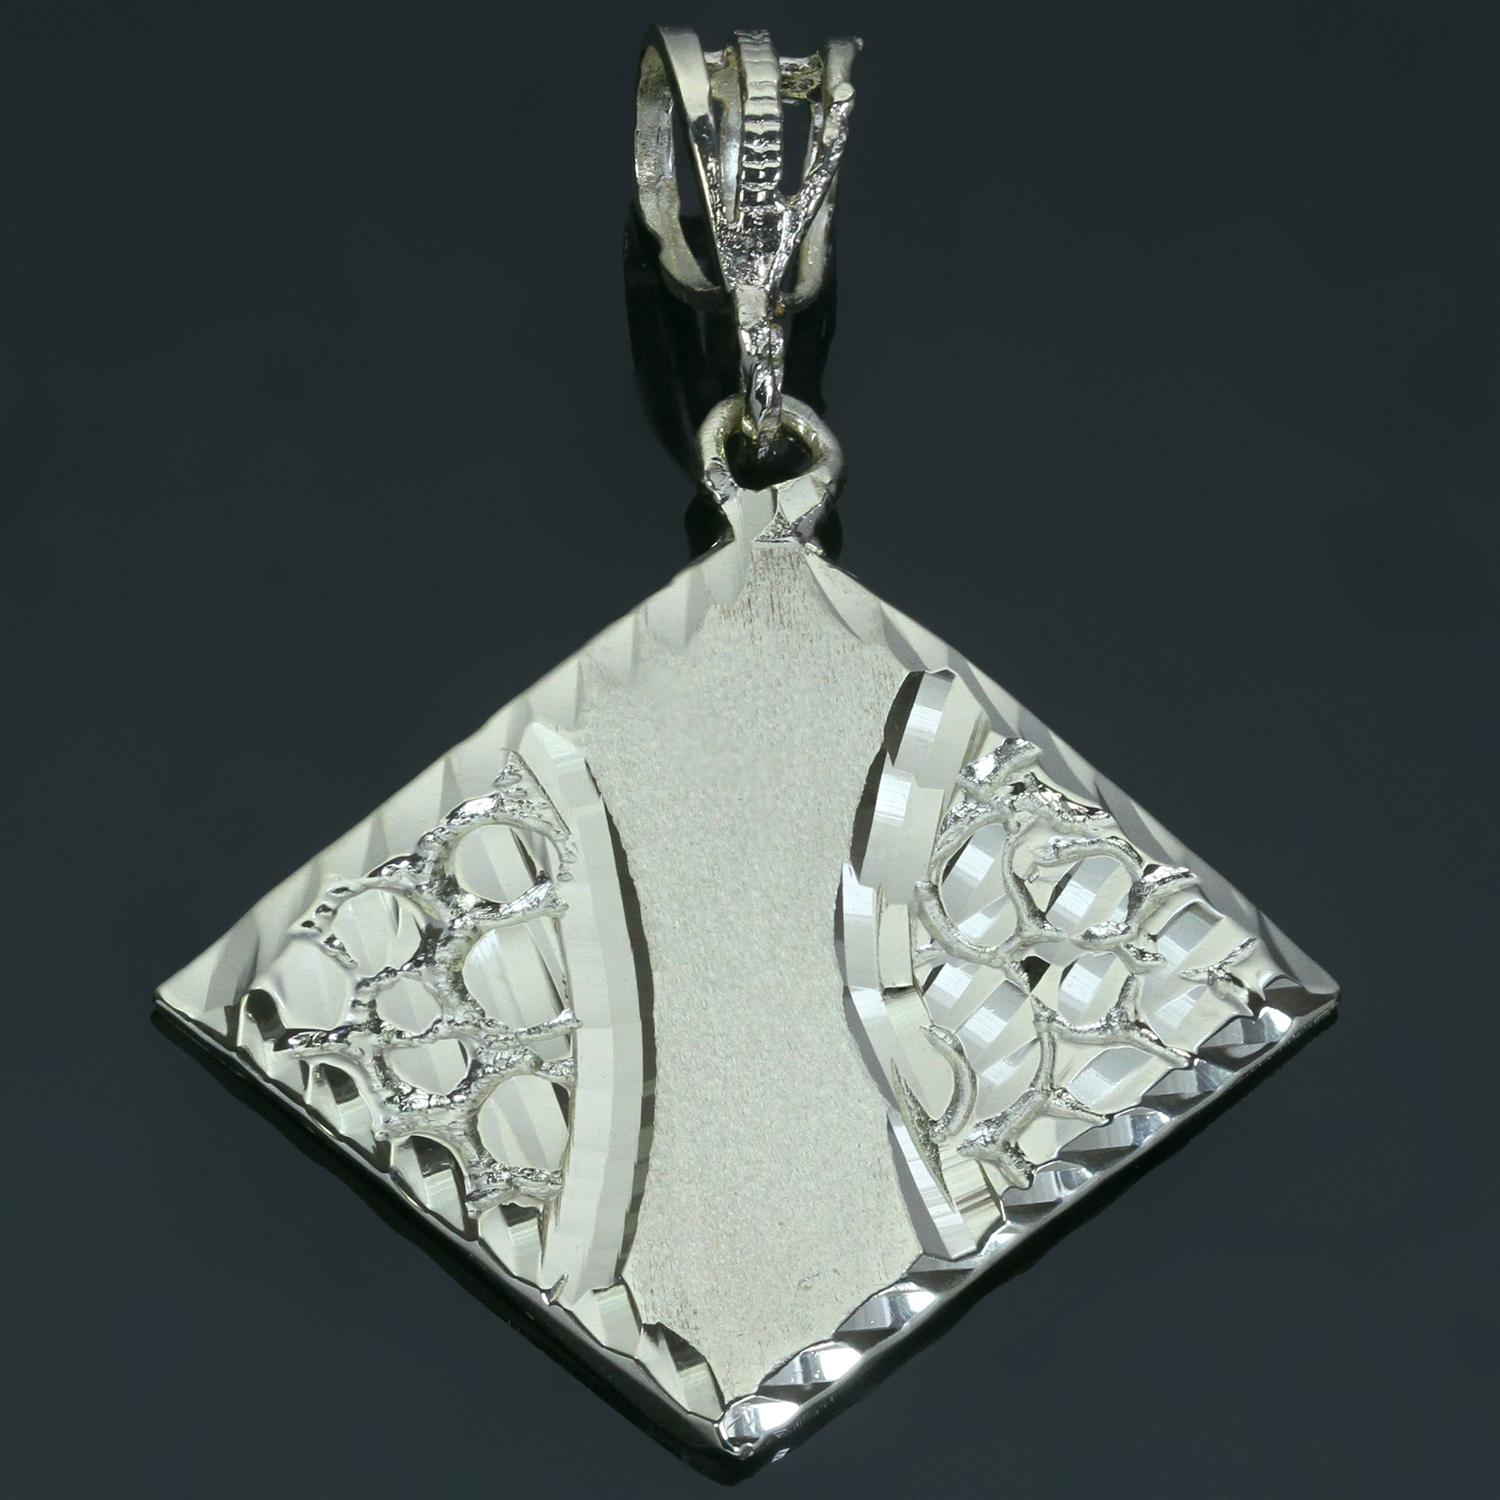 This modern brand new rhombus-shaped pendant features diamond-cut edges and texured accents crafted in 14k yellow gold. Made in United States circa 2000s. Measurements: 1.25